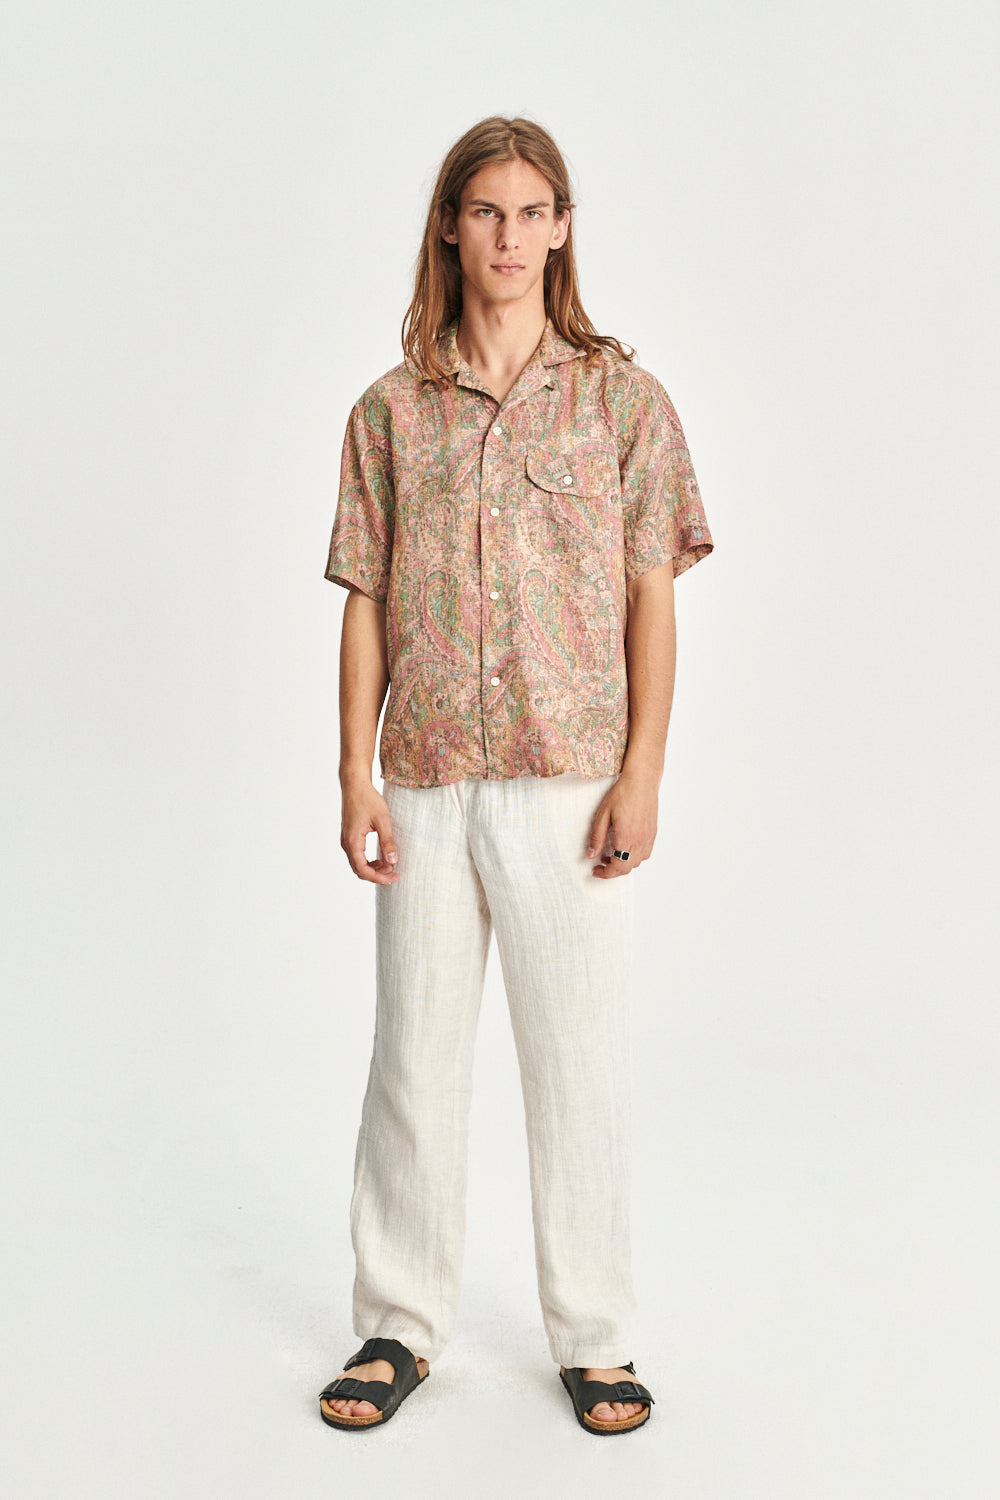 Short Sleeve Relaxed Camp Collar Shirt in a Pink, Green and Beige Shaded Paisley Design Japanese Linen